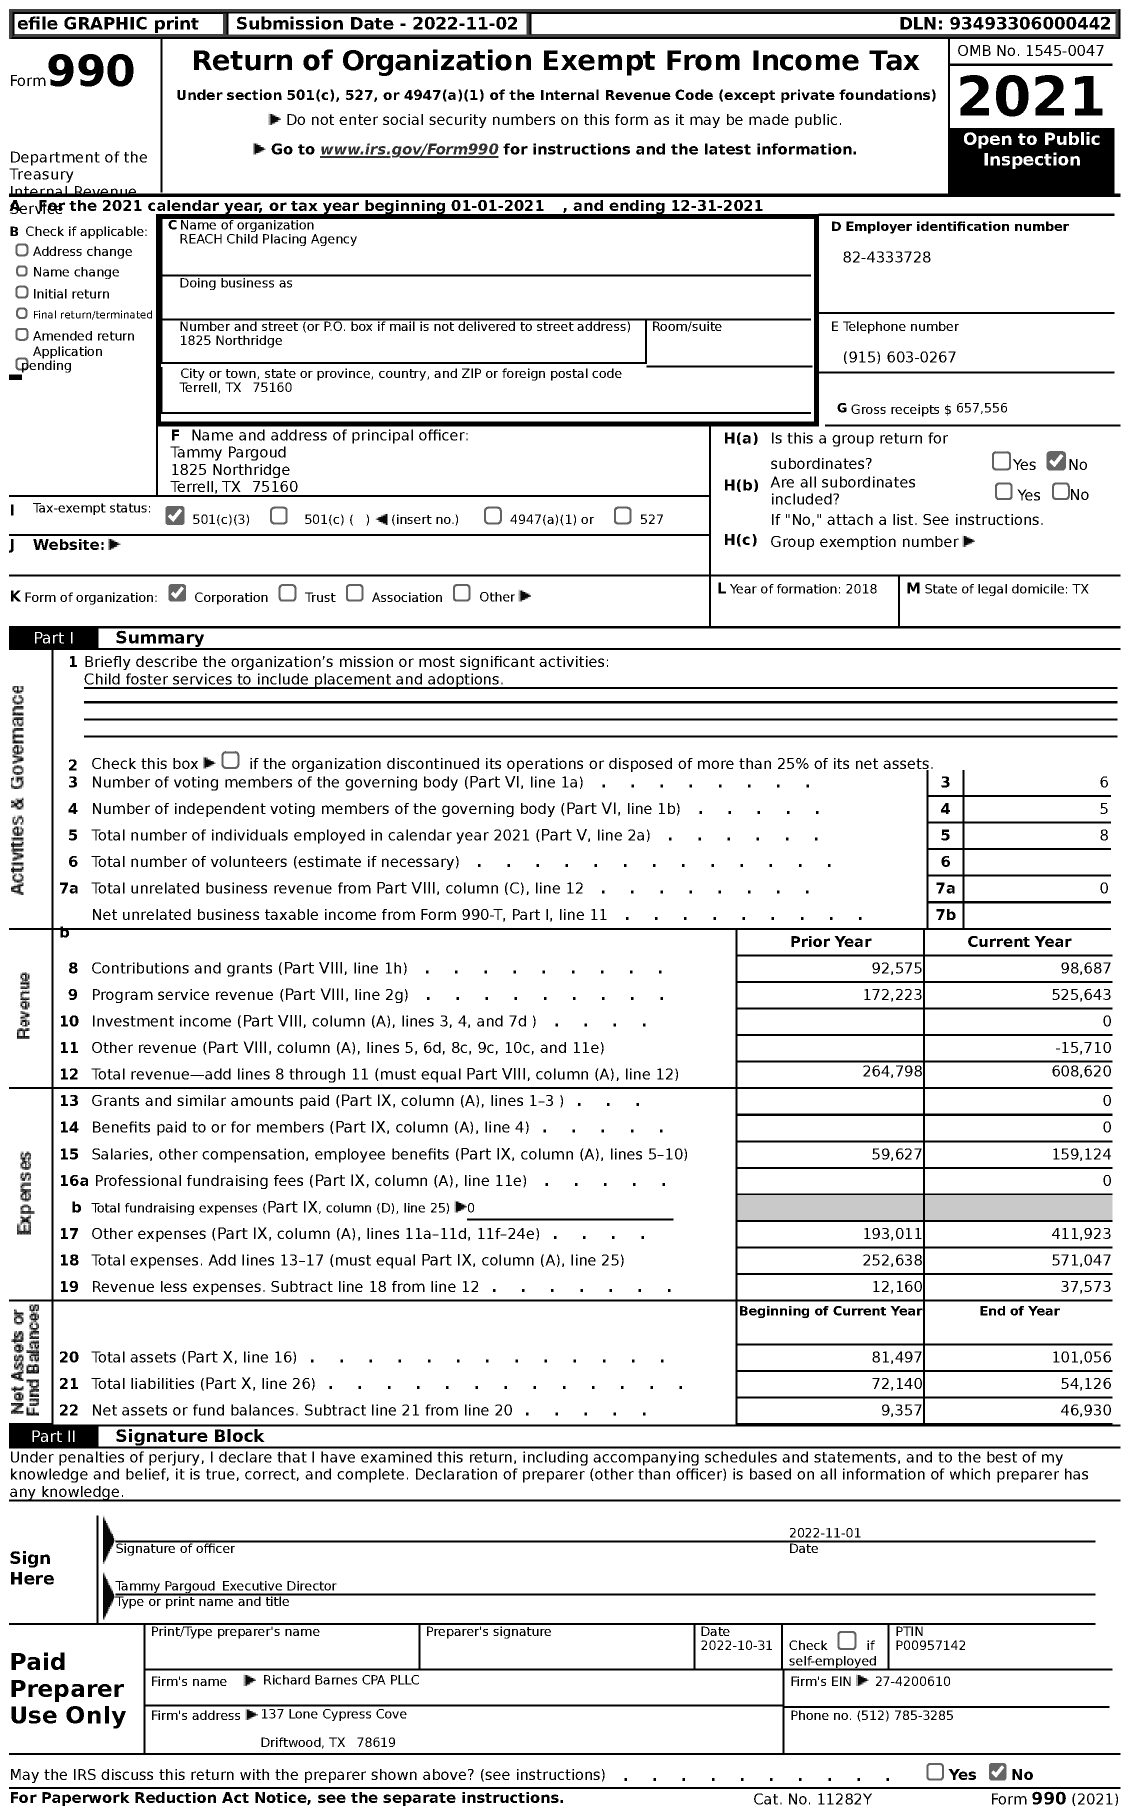 Image of first page of 2021 Form 990 for REACH Child Placing Agency